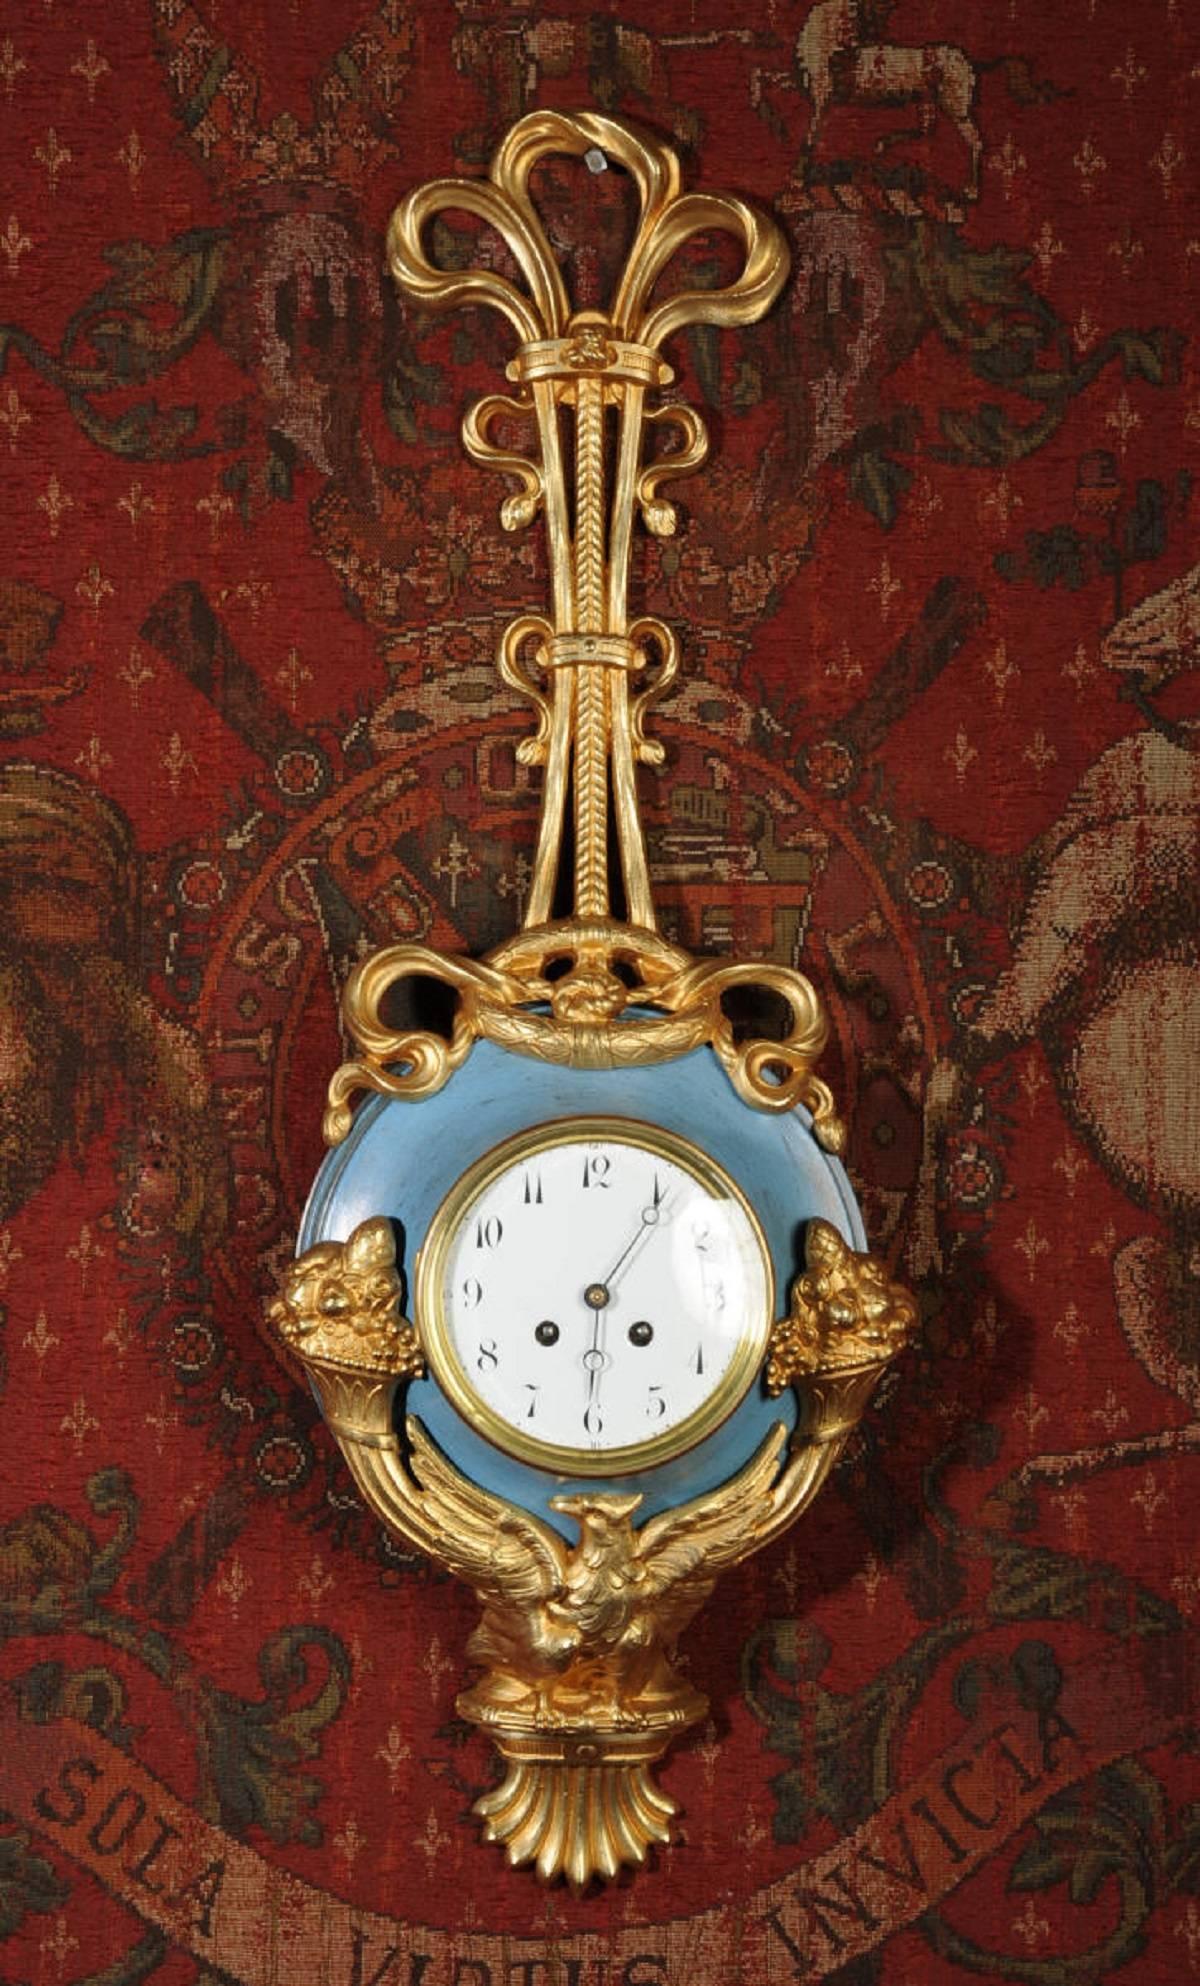 A large, unusual and very decorative original French antique Cartel wall clock. It is classical in design, hanging from a large gilt bronze bow with a laurel wreath. The clock is mounted in a toleware body with original blue painted finish. Below